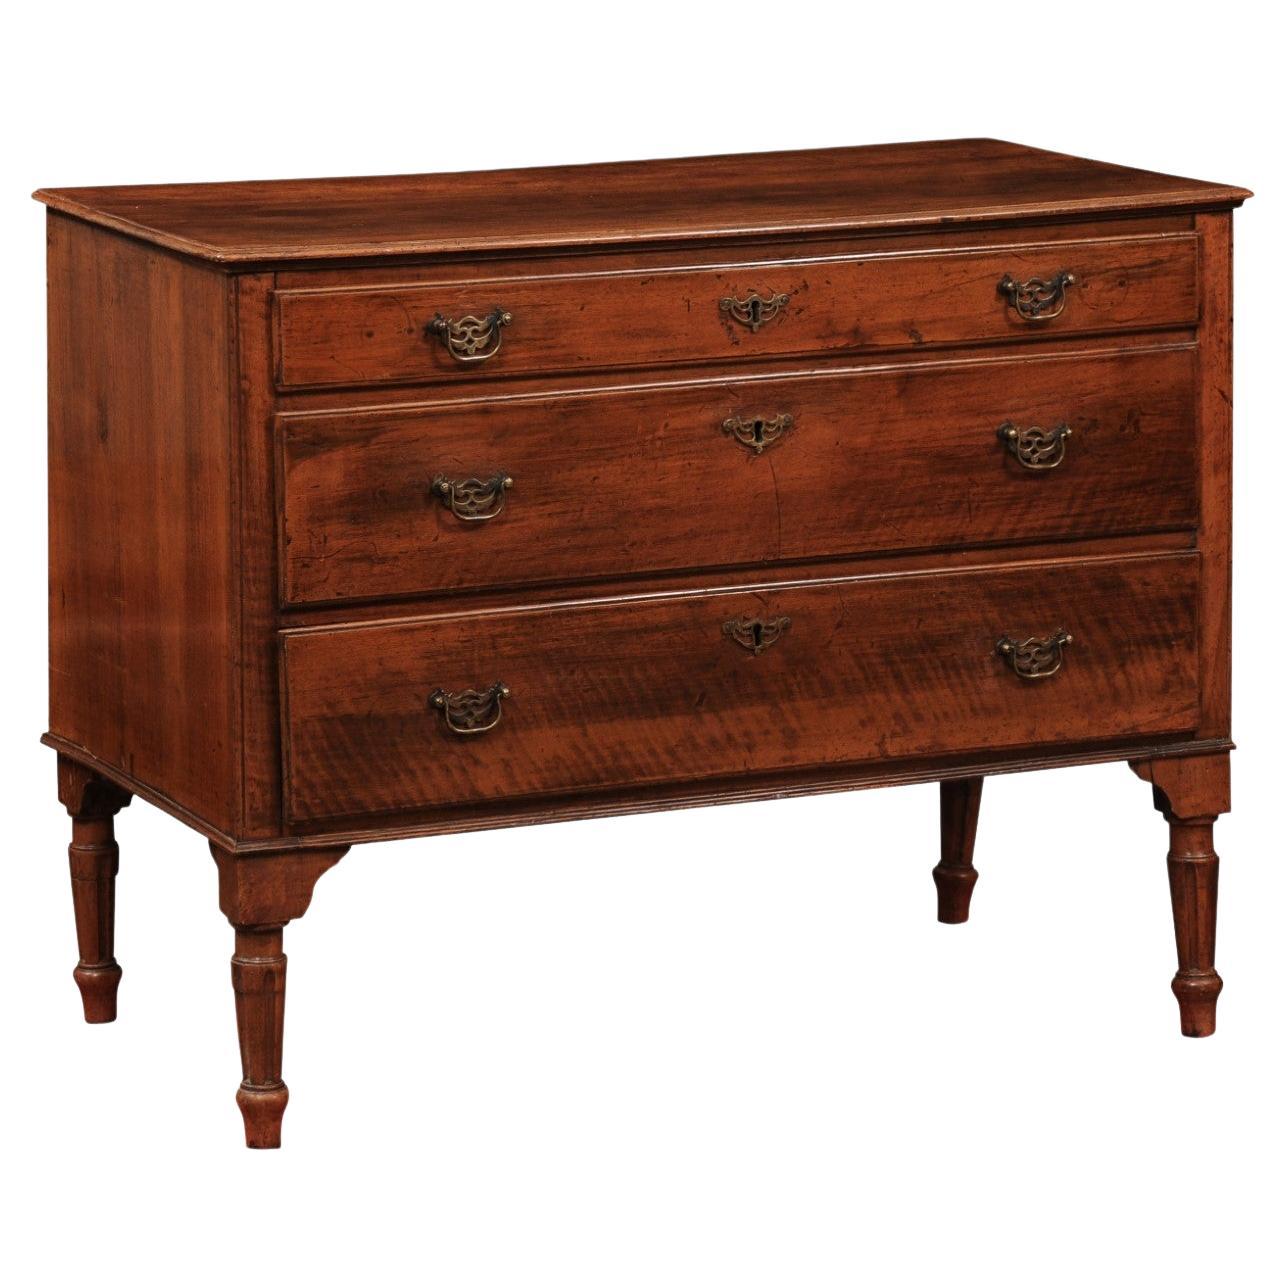 French Louis XVI Walnut Commode with 3 Drawers and Fluted Legs For Sale